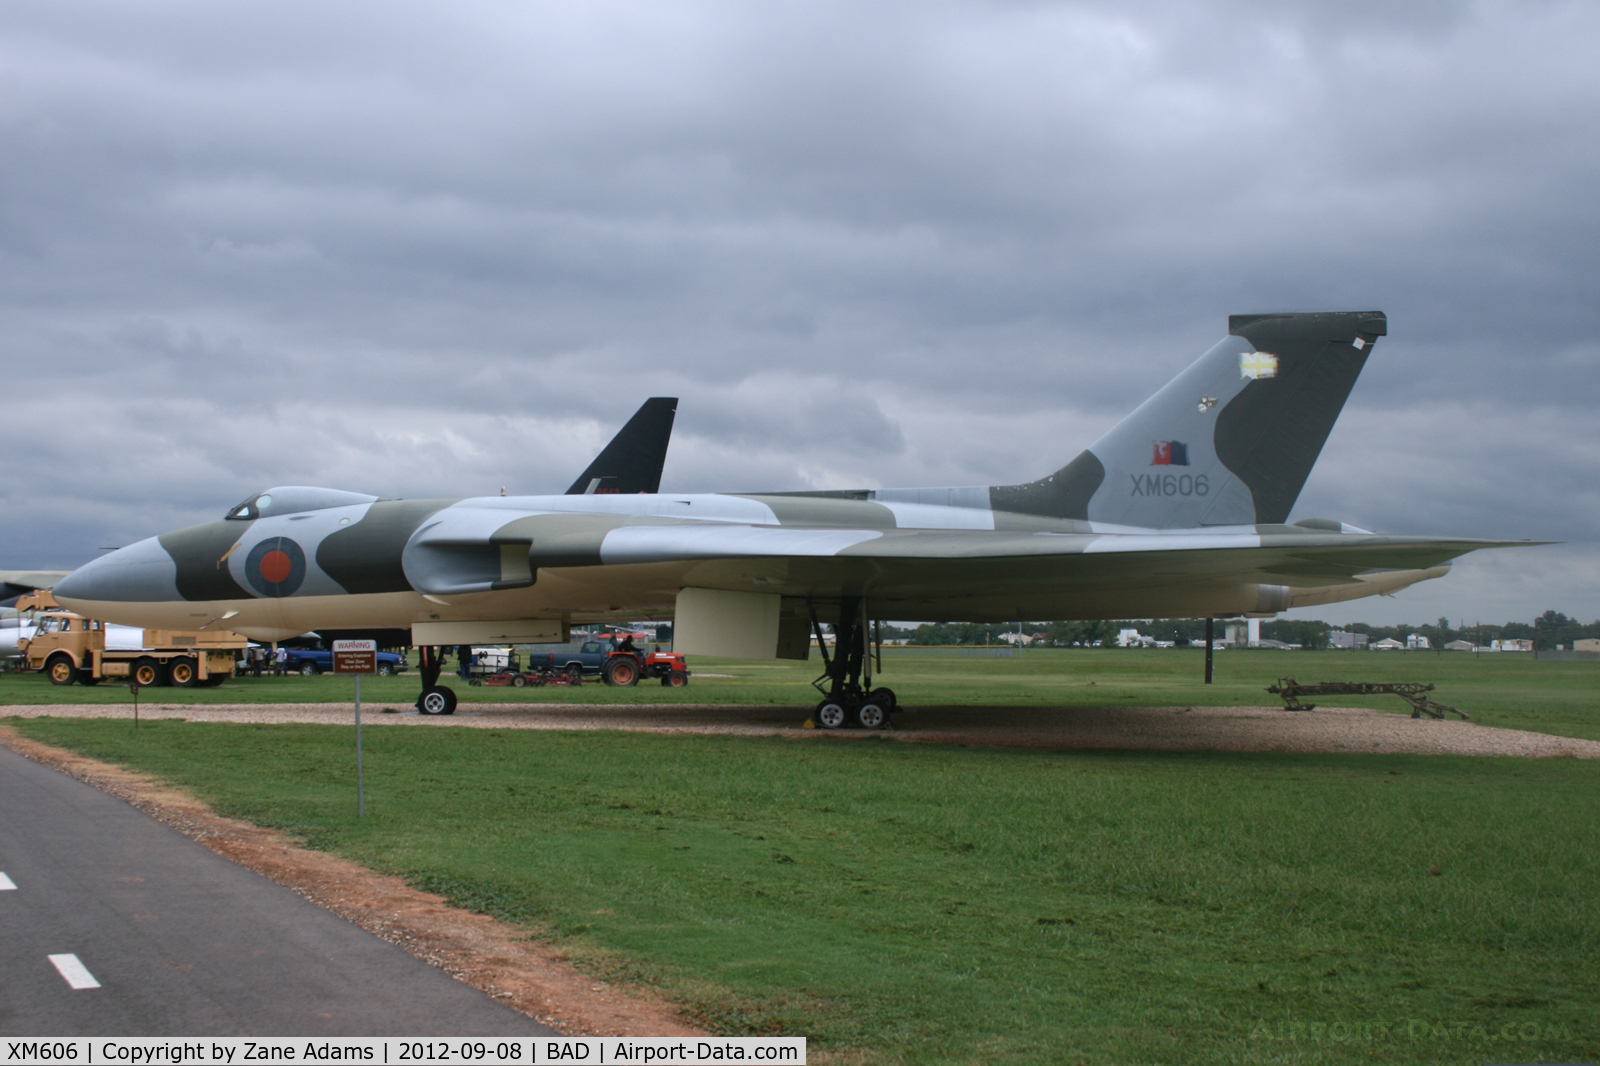 XM606, 1963 Avro Vulcan B.2 C/N Set 70, On display at the 8th Air Force Museum - Barksdale AFB, Shreveport, LA